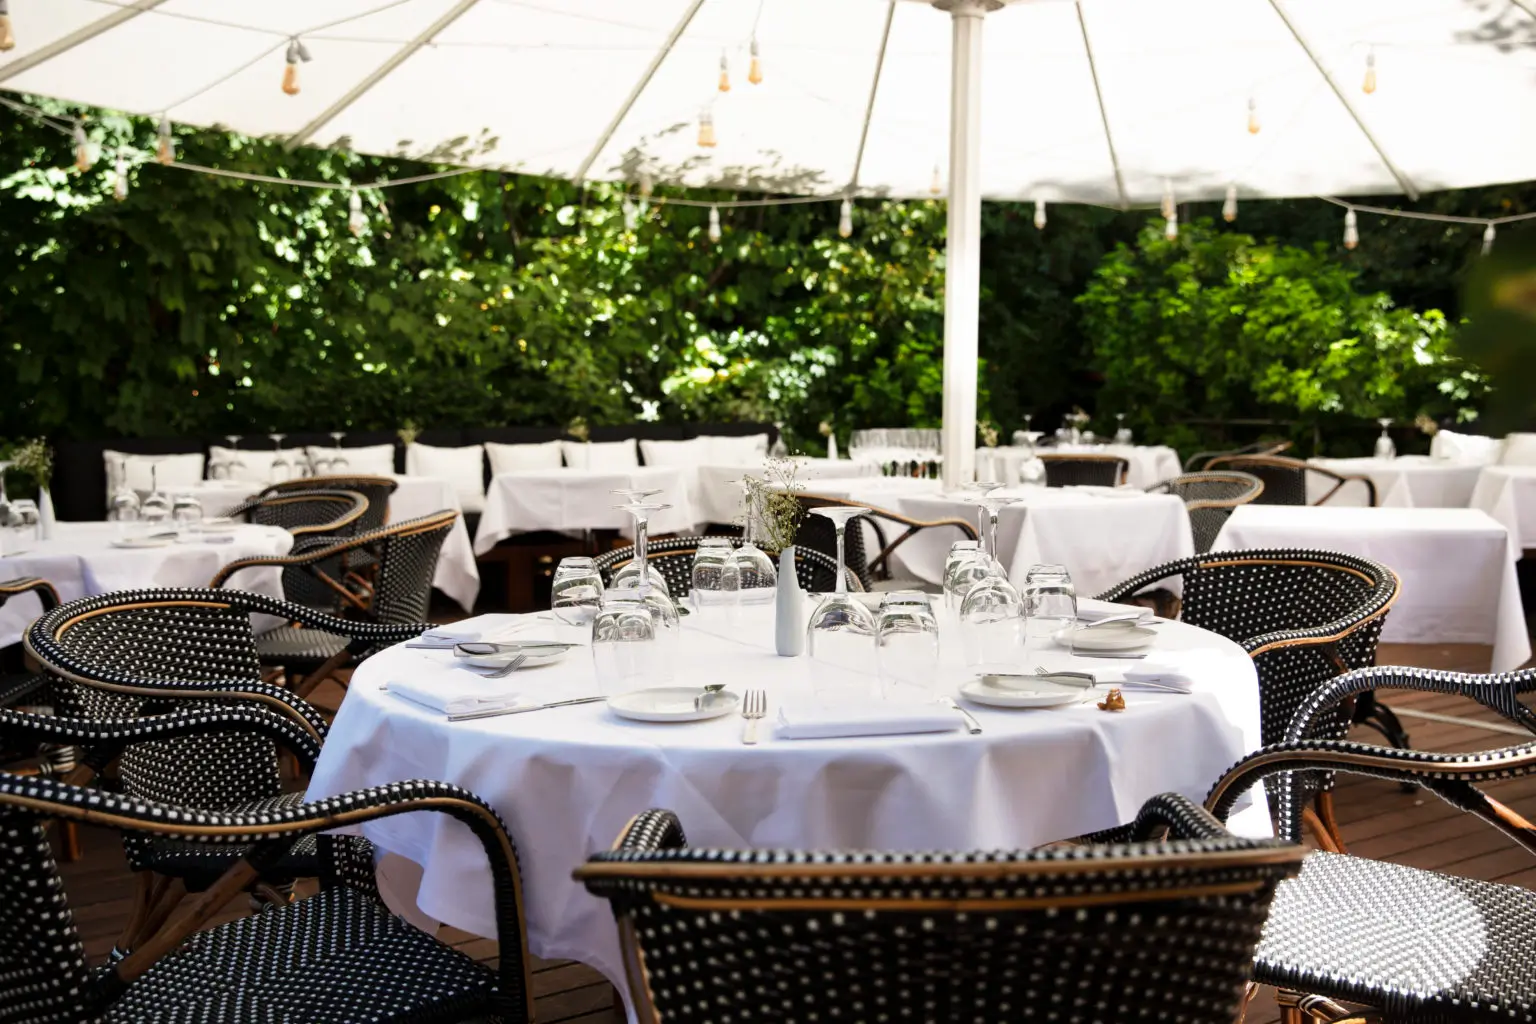 Outdoor dining area with white tablecloths and wicker chairs at Villa9Trois, a Michelin Star restaurant in Paris